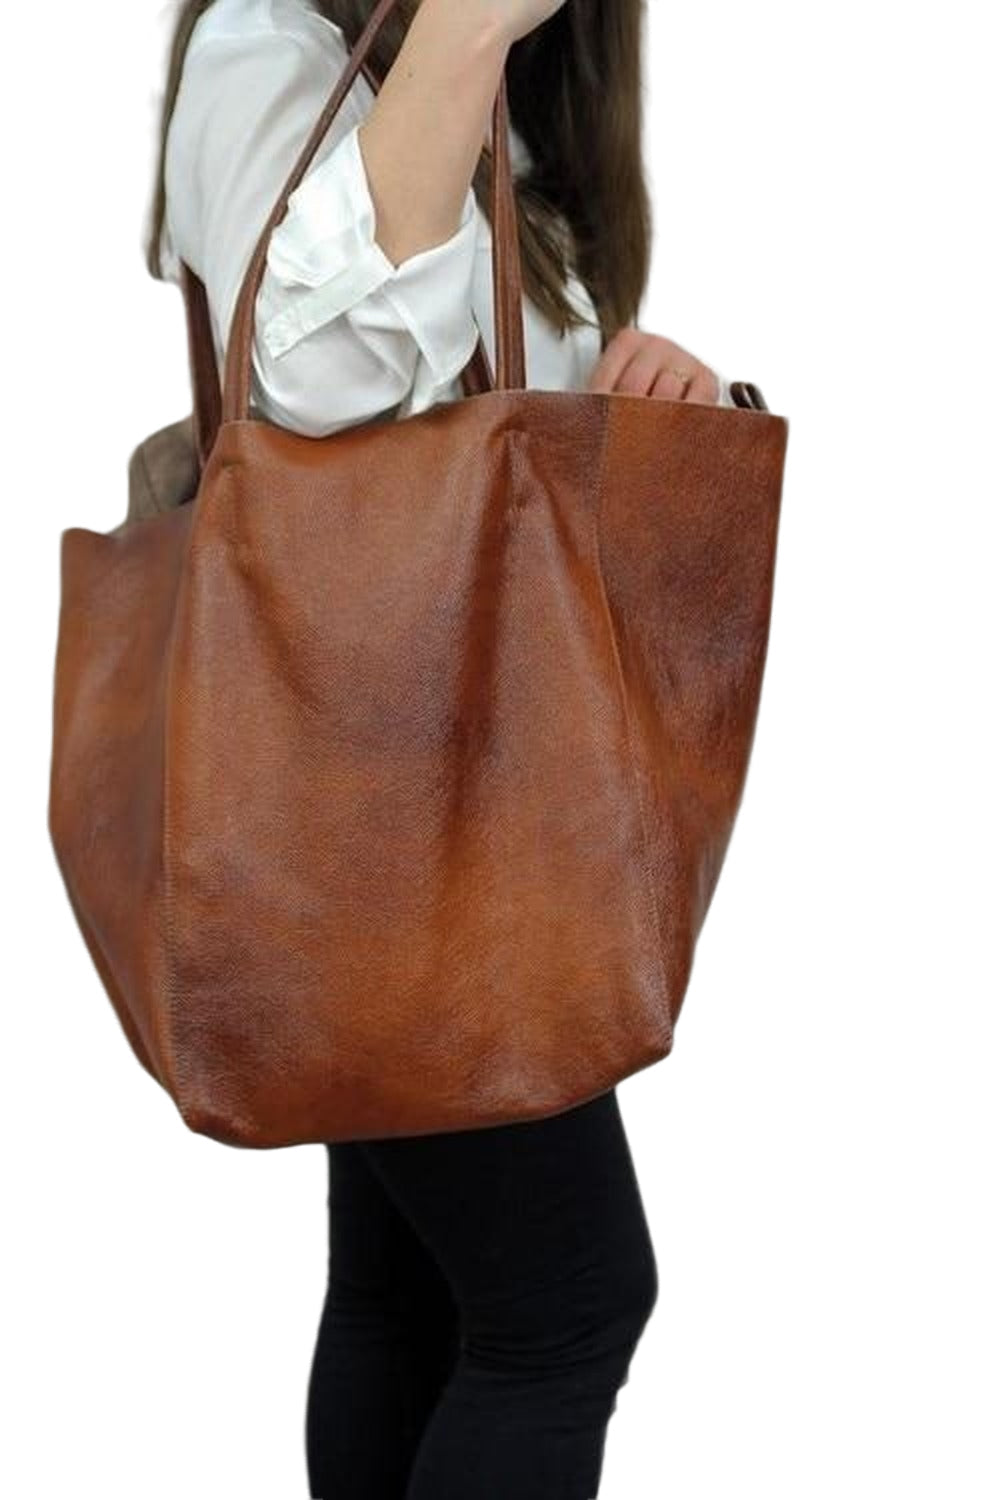 Casual Over Large Tote Bags for Women Shoulder Bag Simple Big Handbags Luxury Soft Shopper Composited Purse